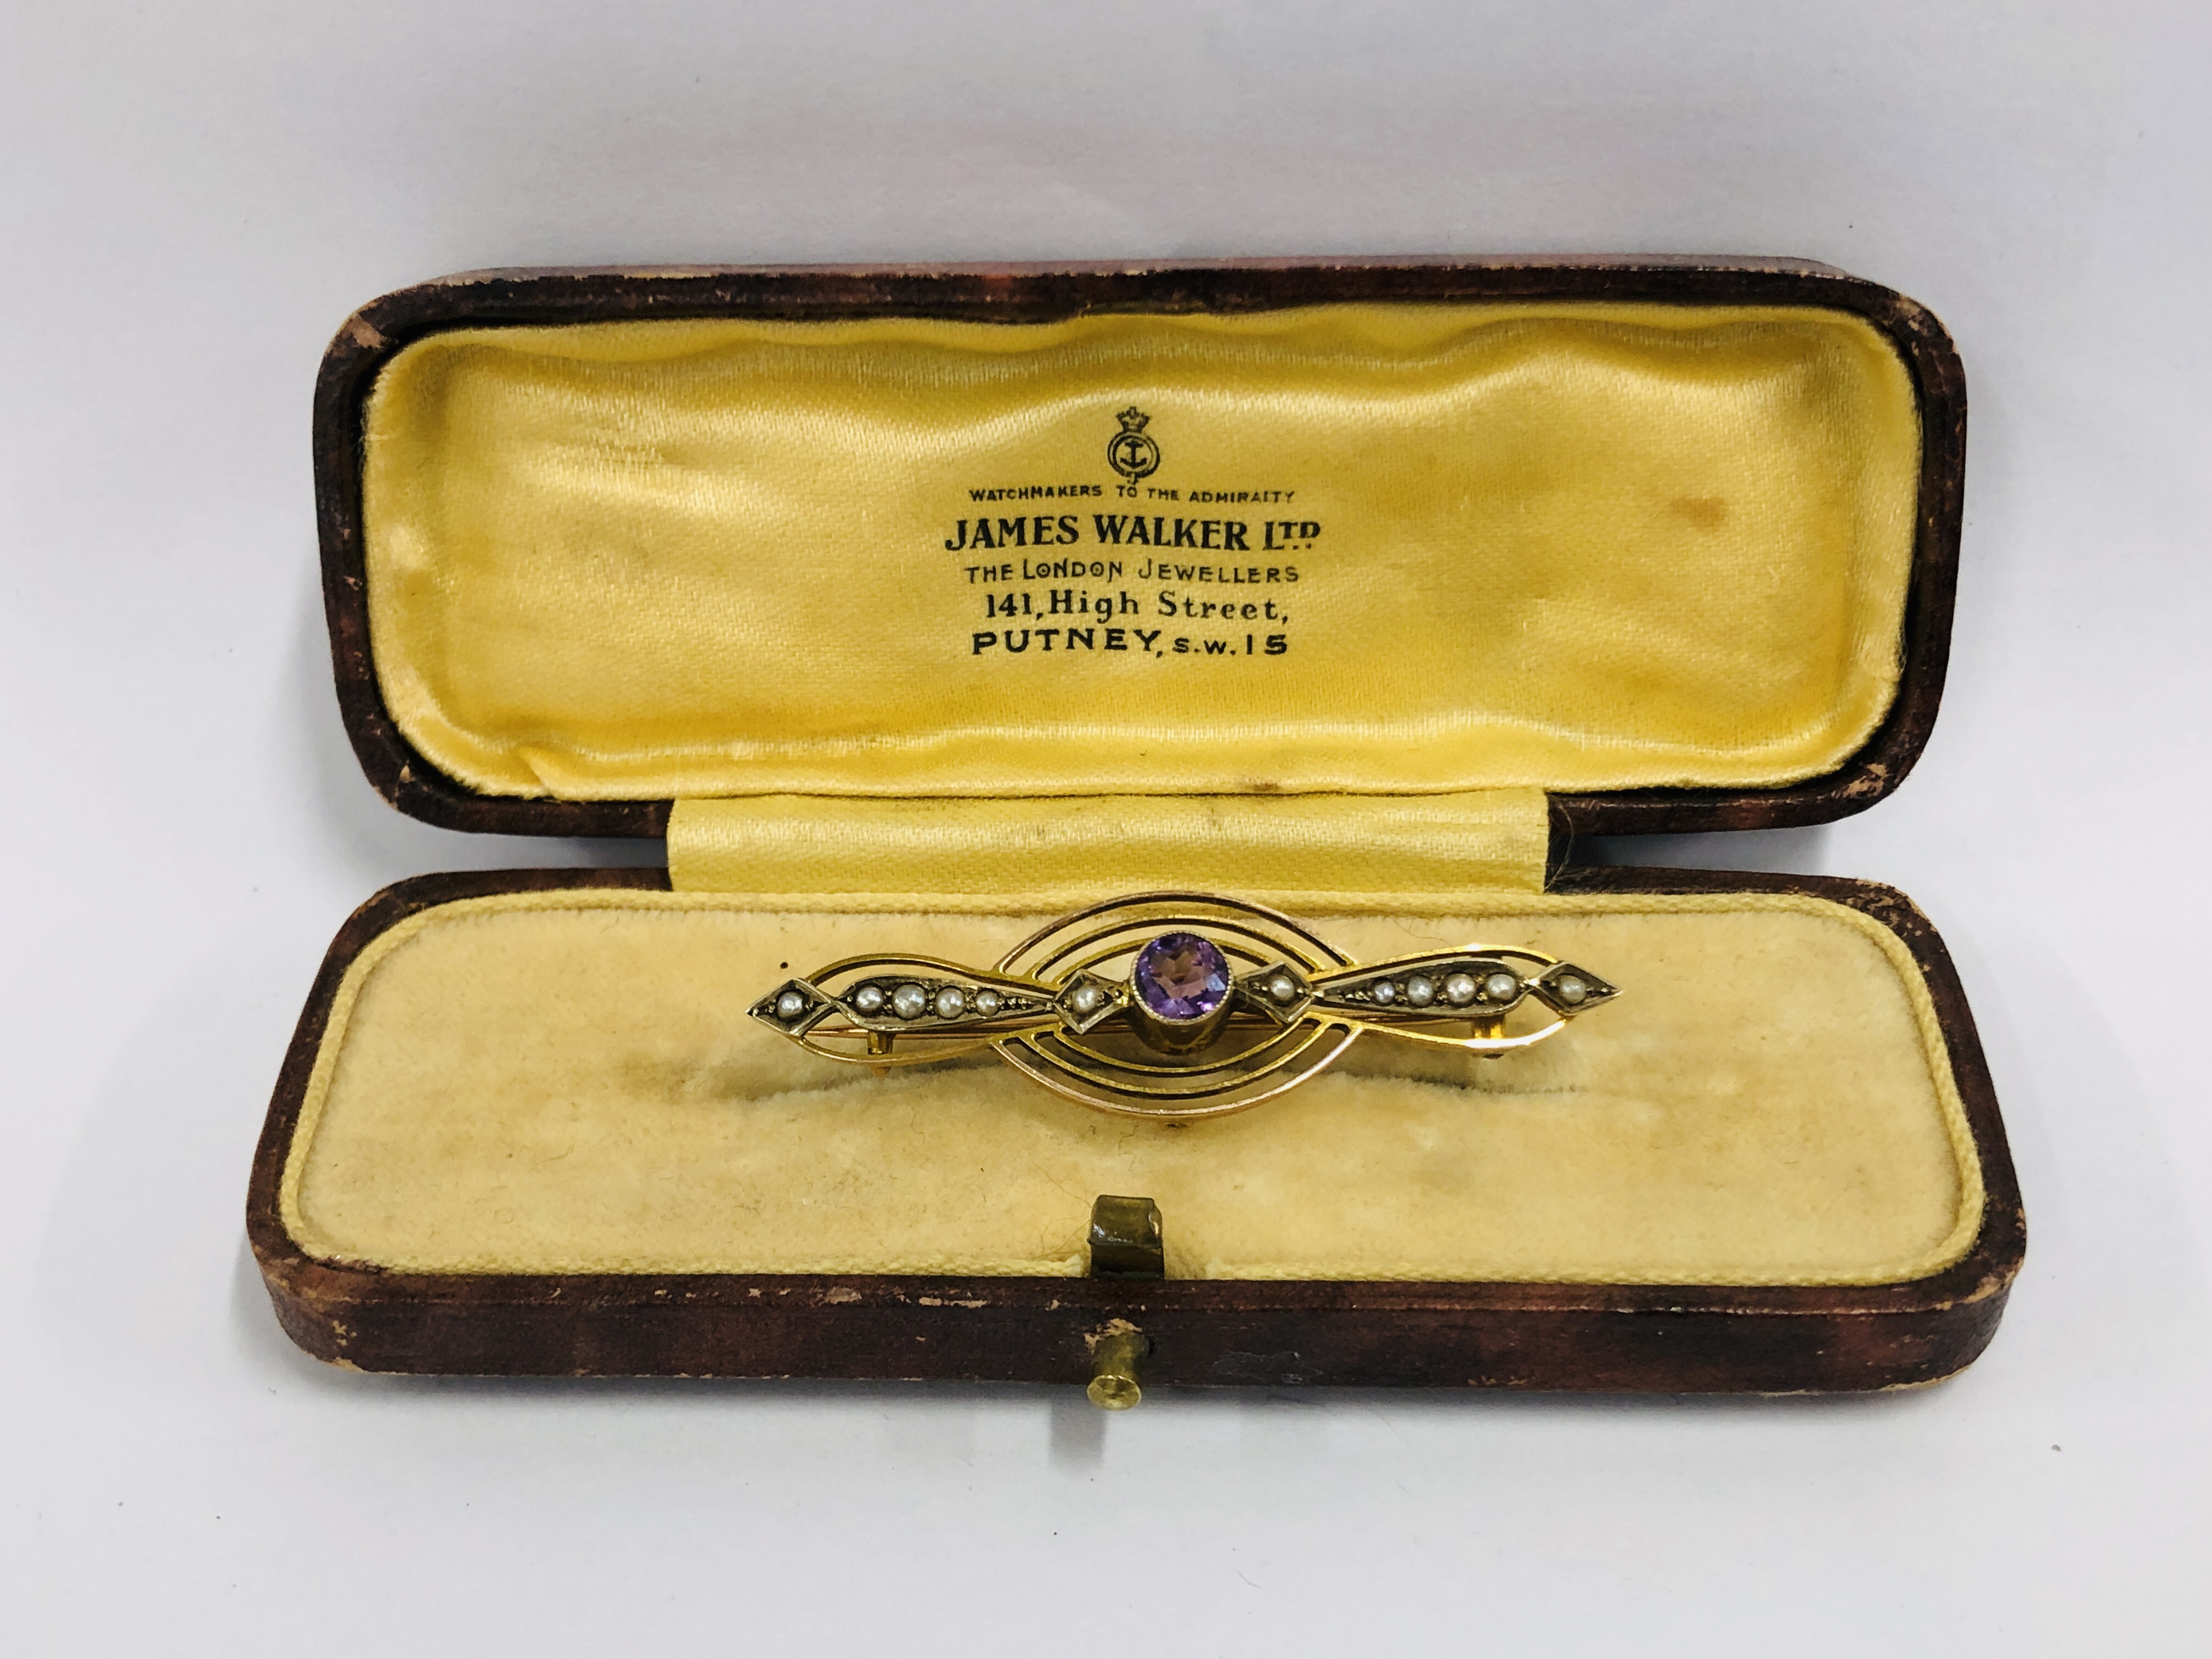 A VINTAGE 9CT BROOCH / PENDANT SET WITH CENTRAL AMETHYST AND SEED PEARLS IN A VINTAGE BOX MARKED